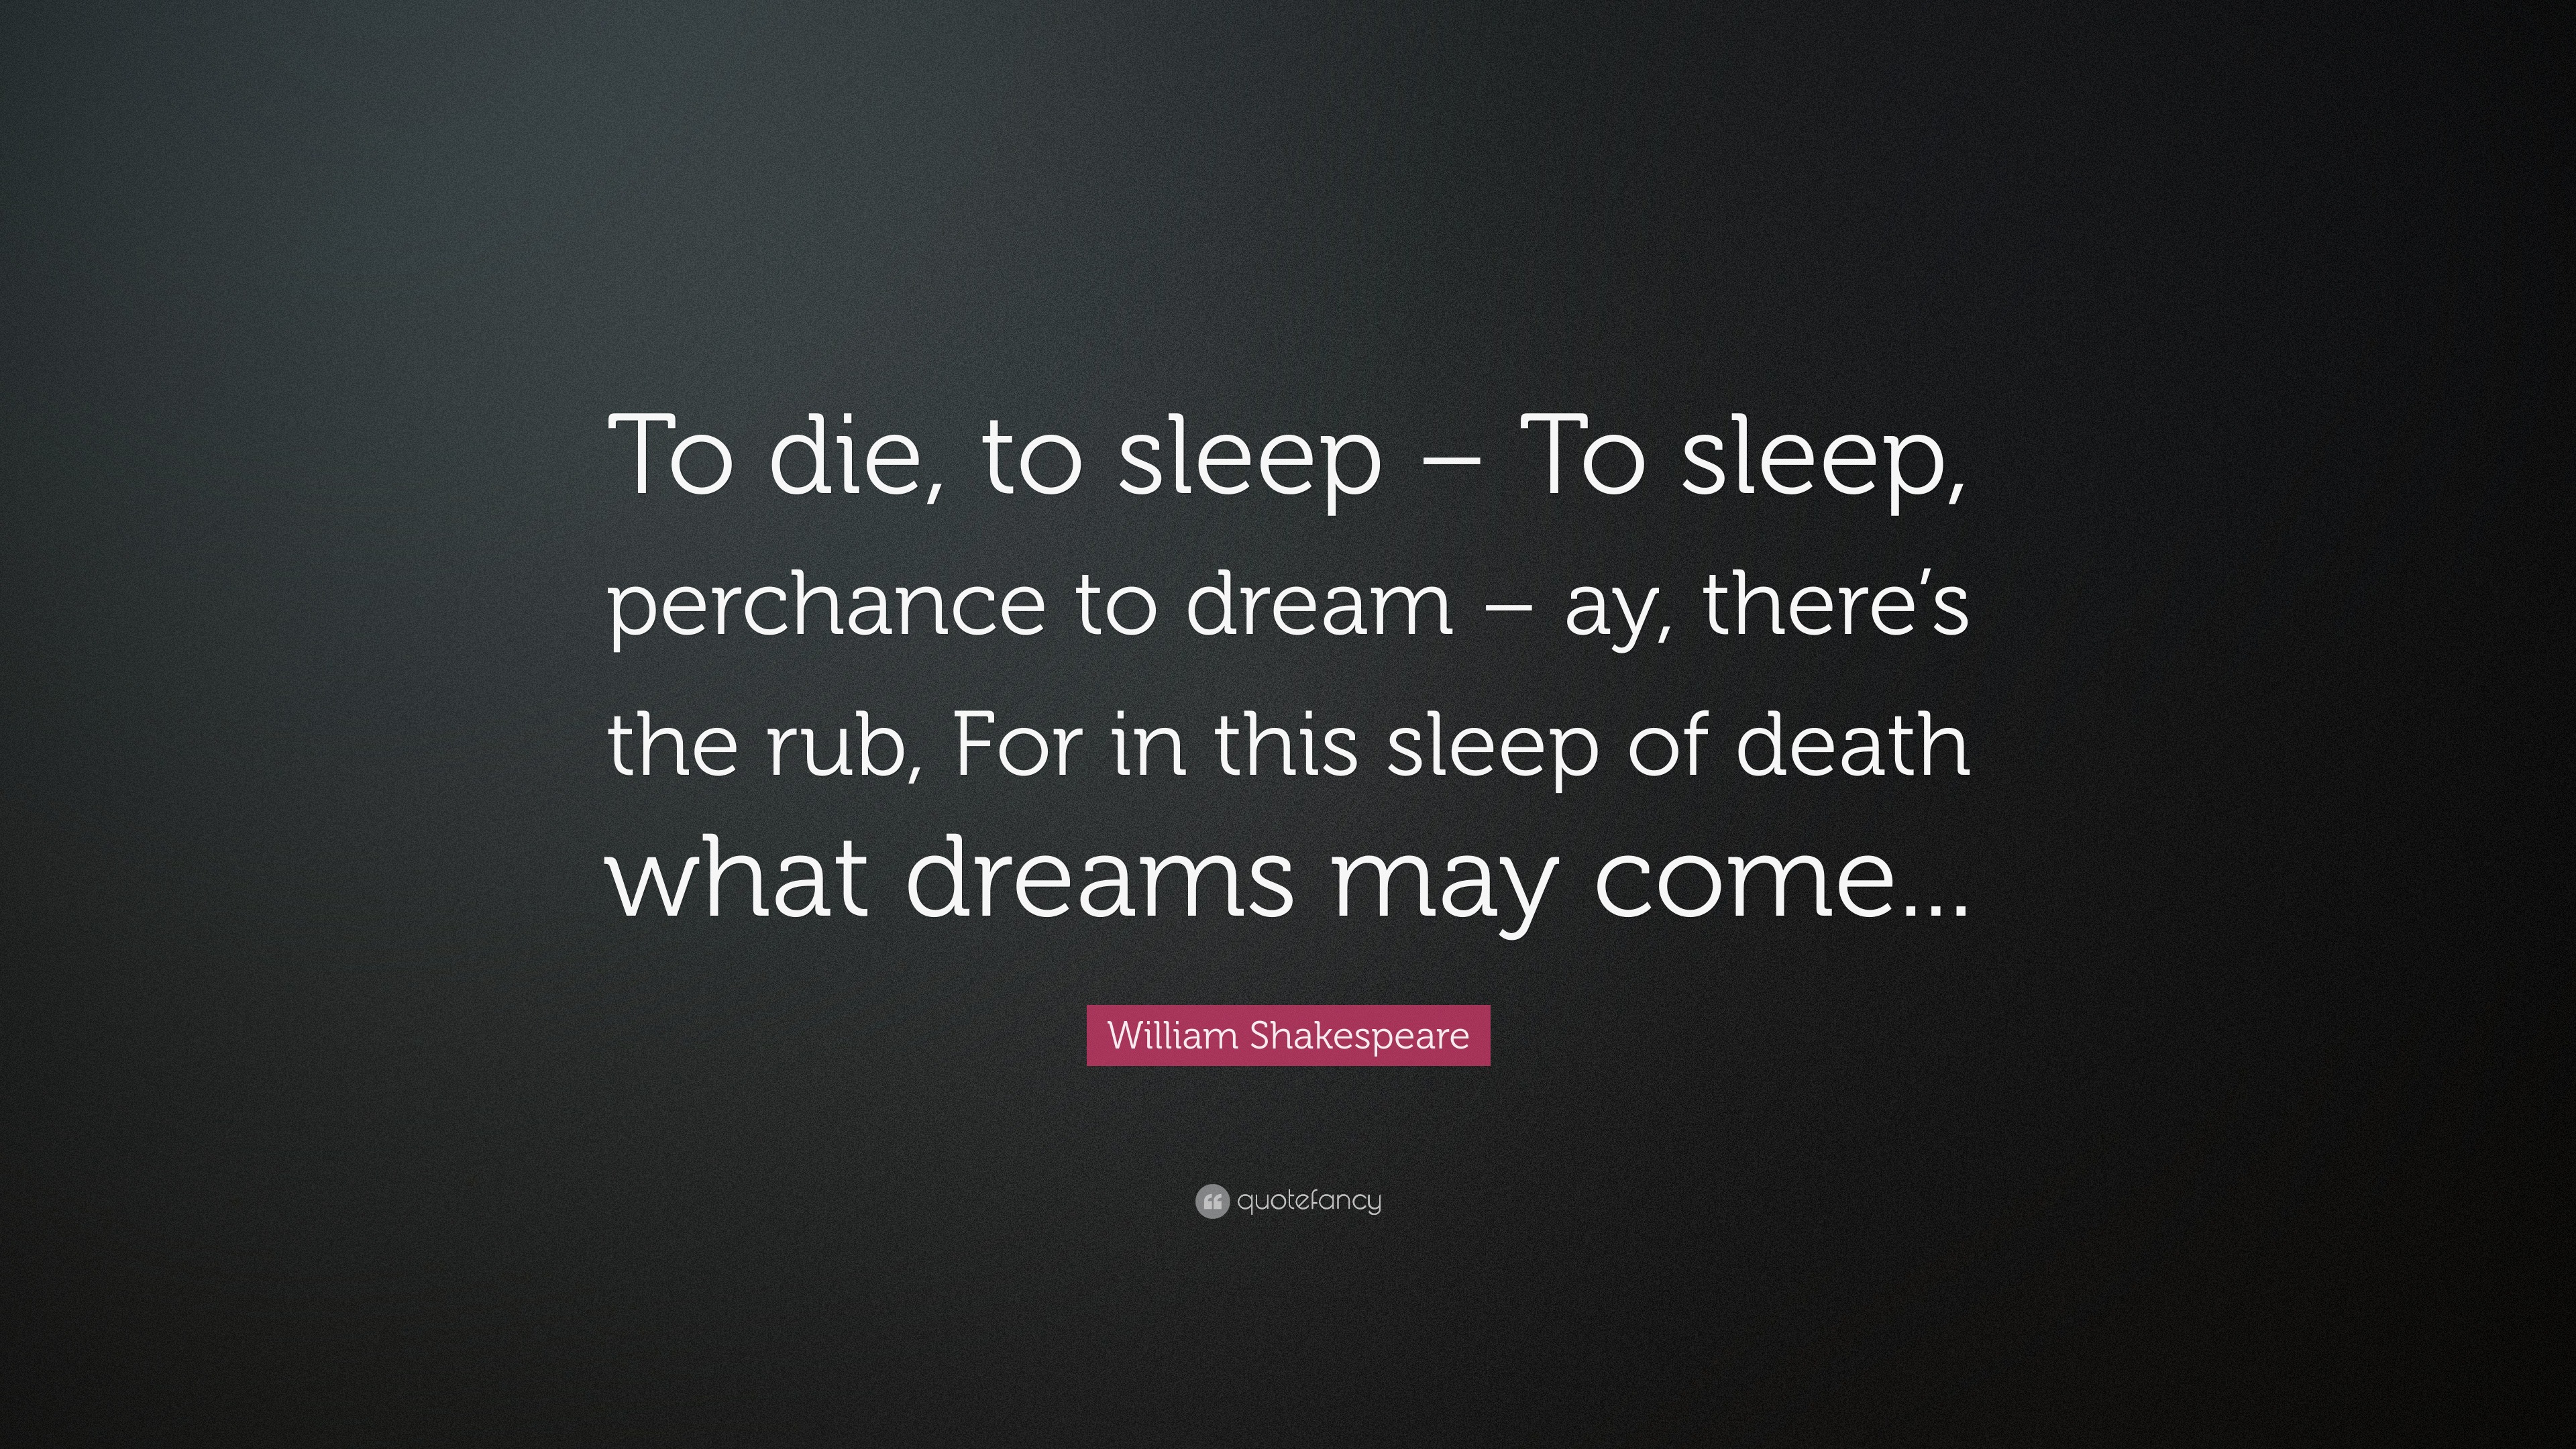 William Shakespeare Quote: “To die, to sleep – To sleep, perchance to